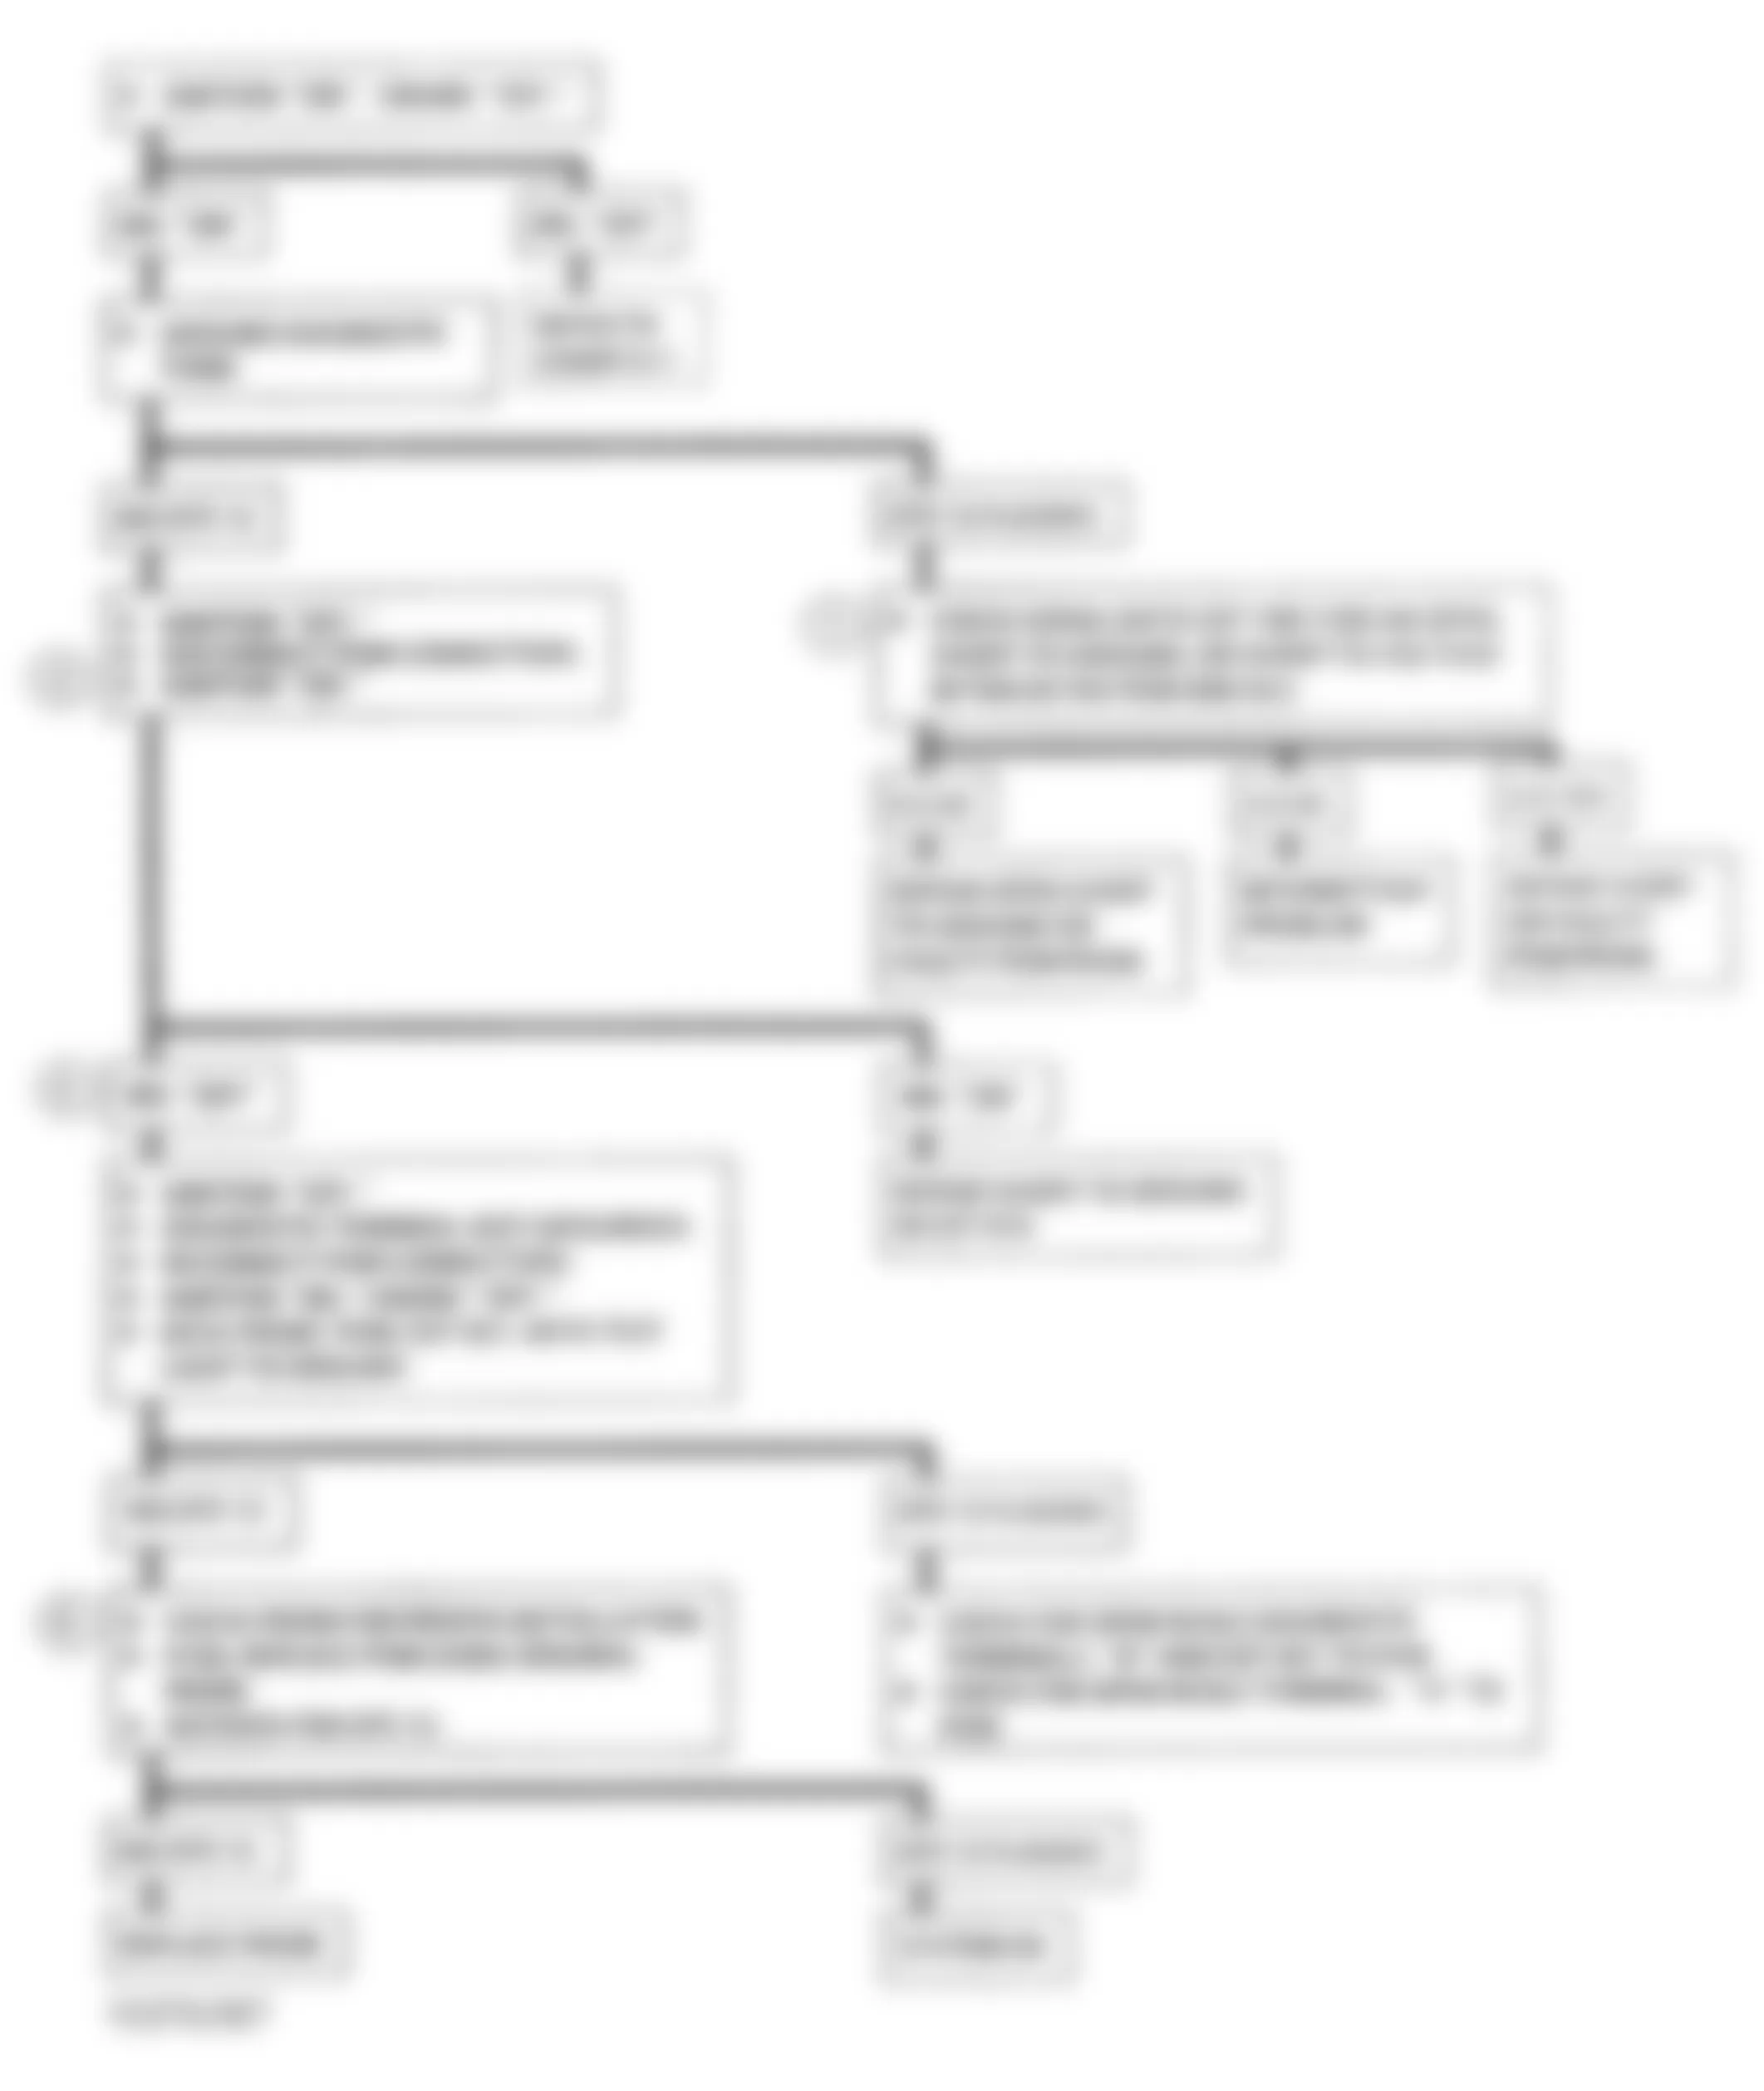 GMC Suburban K2500 1993 - Component Locations -  A-2, Flowchart, No DLC Data, MIL On All Time - A/T